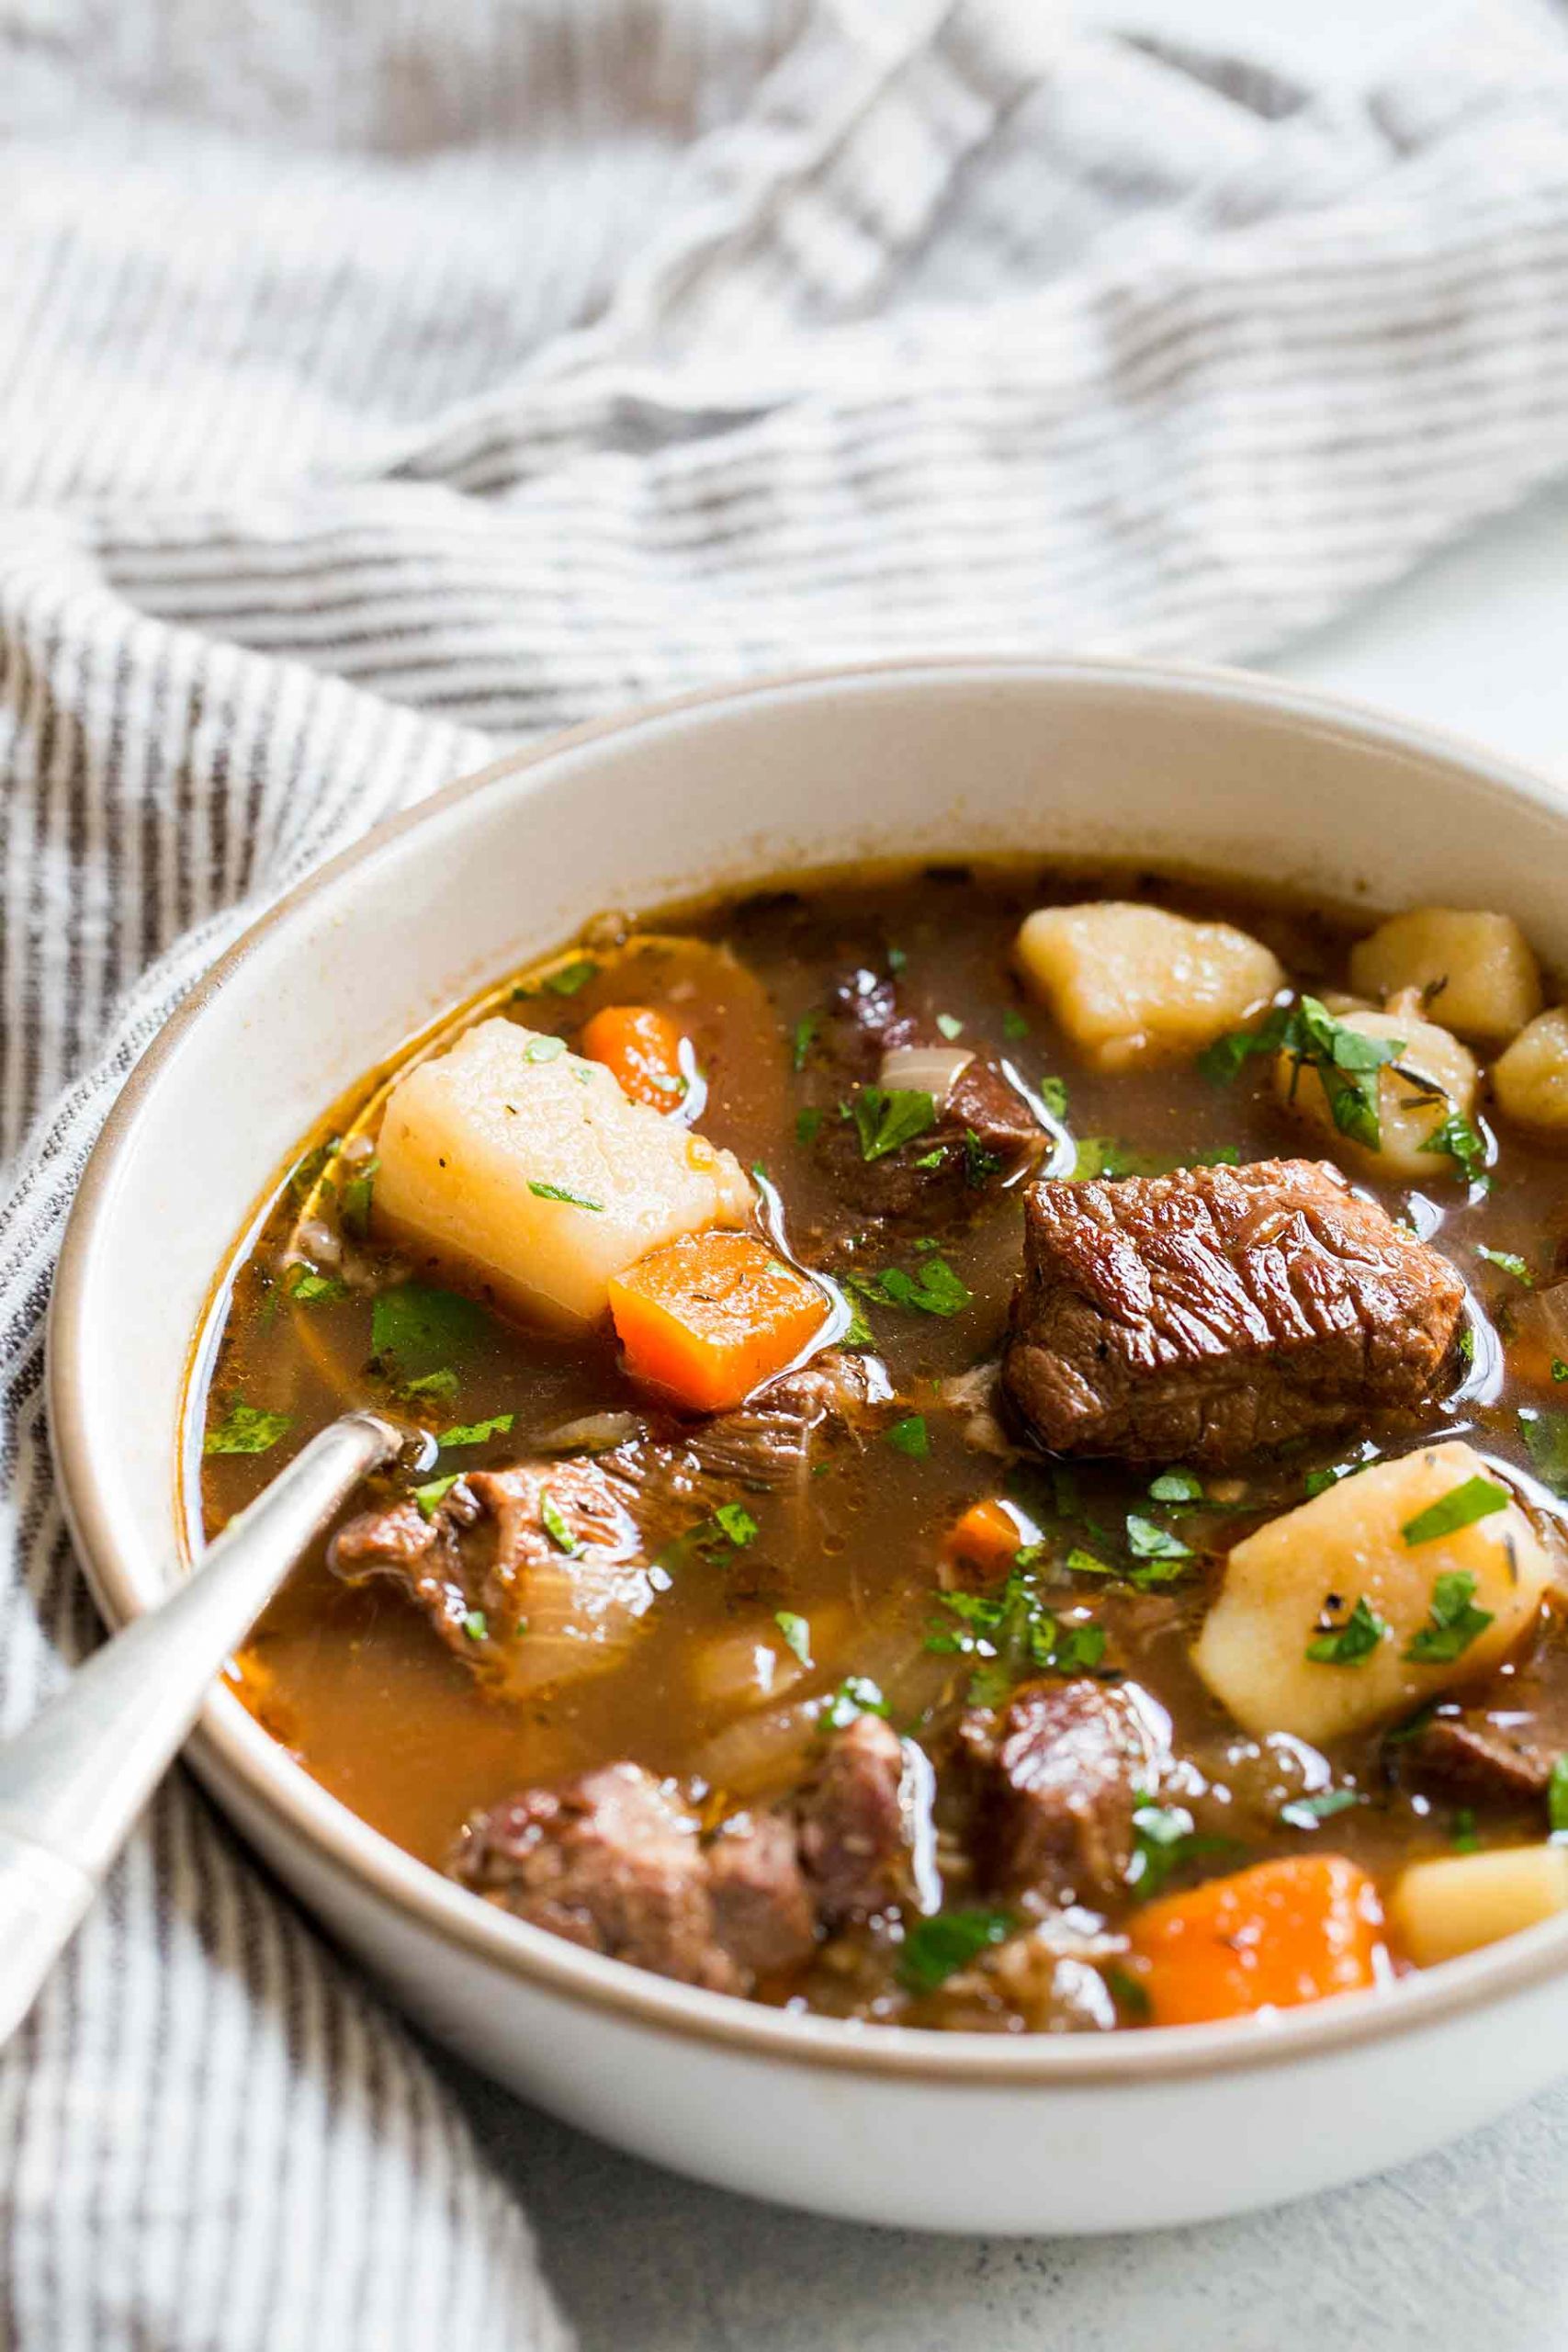 Recipes For Lamb Stew
 Irish Beef Stew Recipe with Video